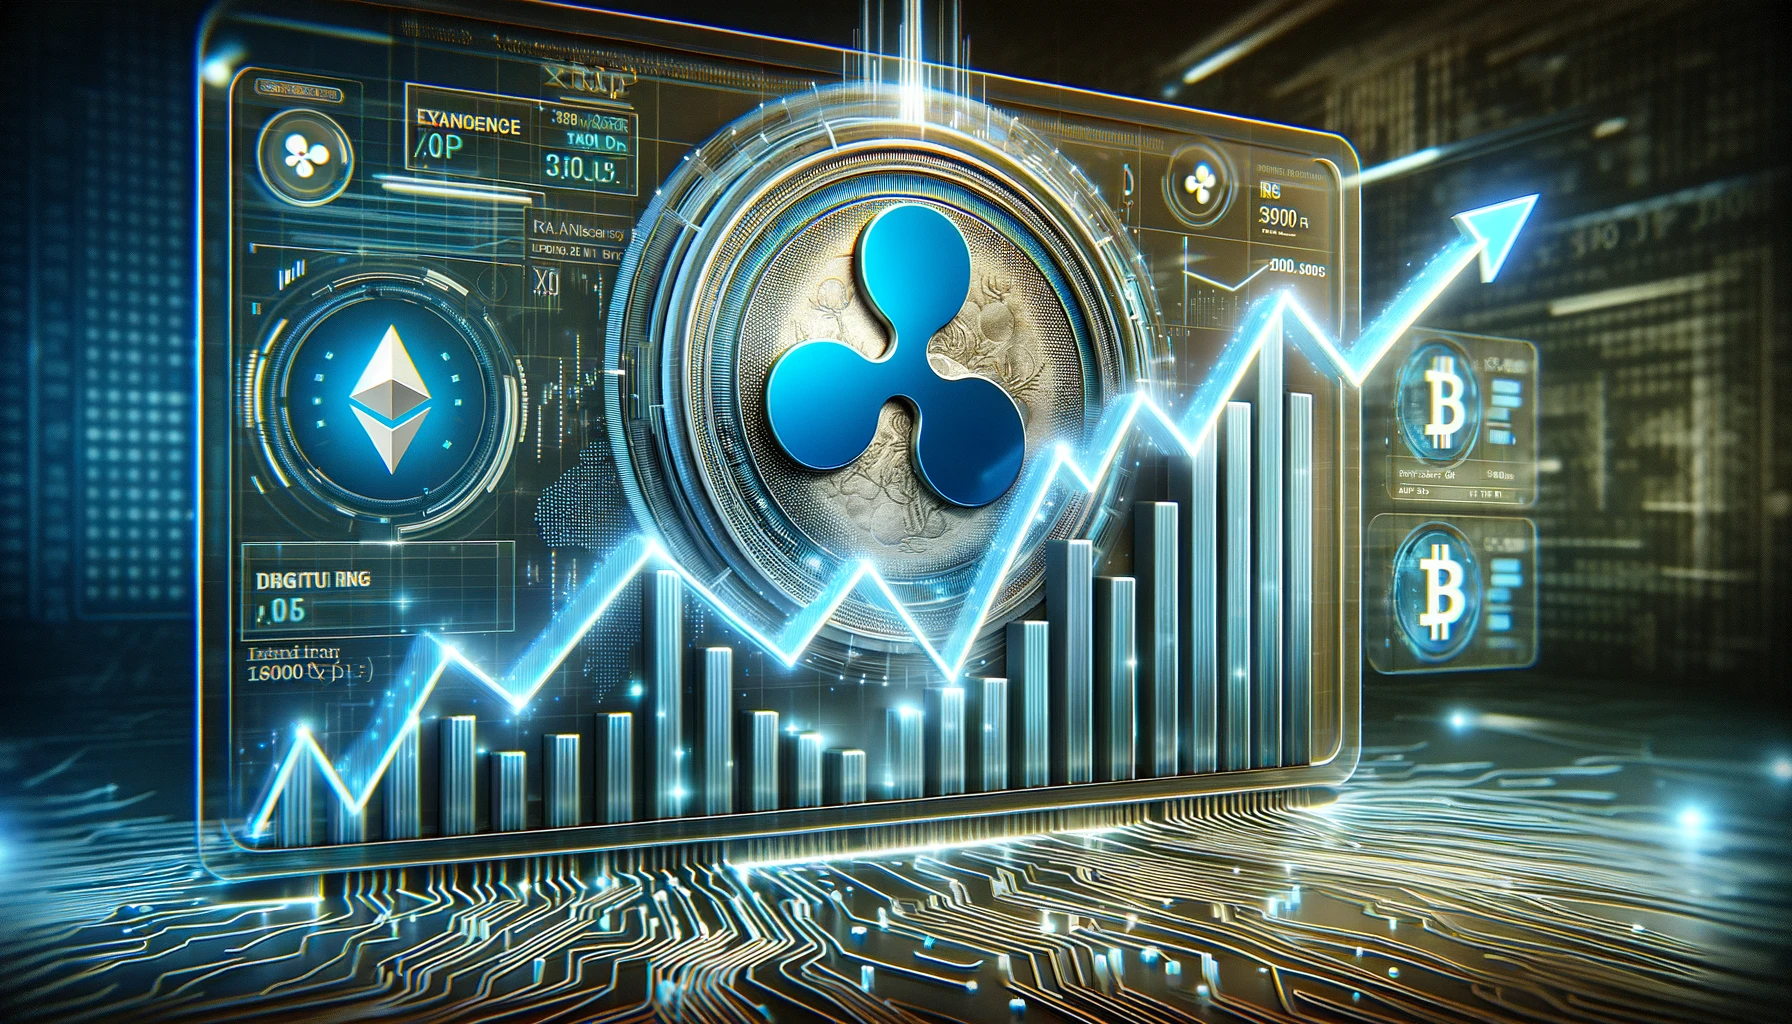 Google Bard predicts the price of Ripple (XRP) for the coming years